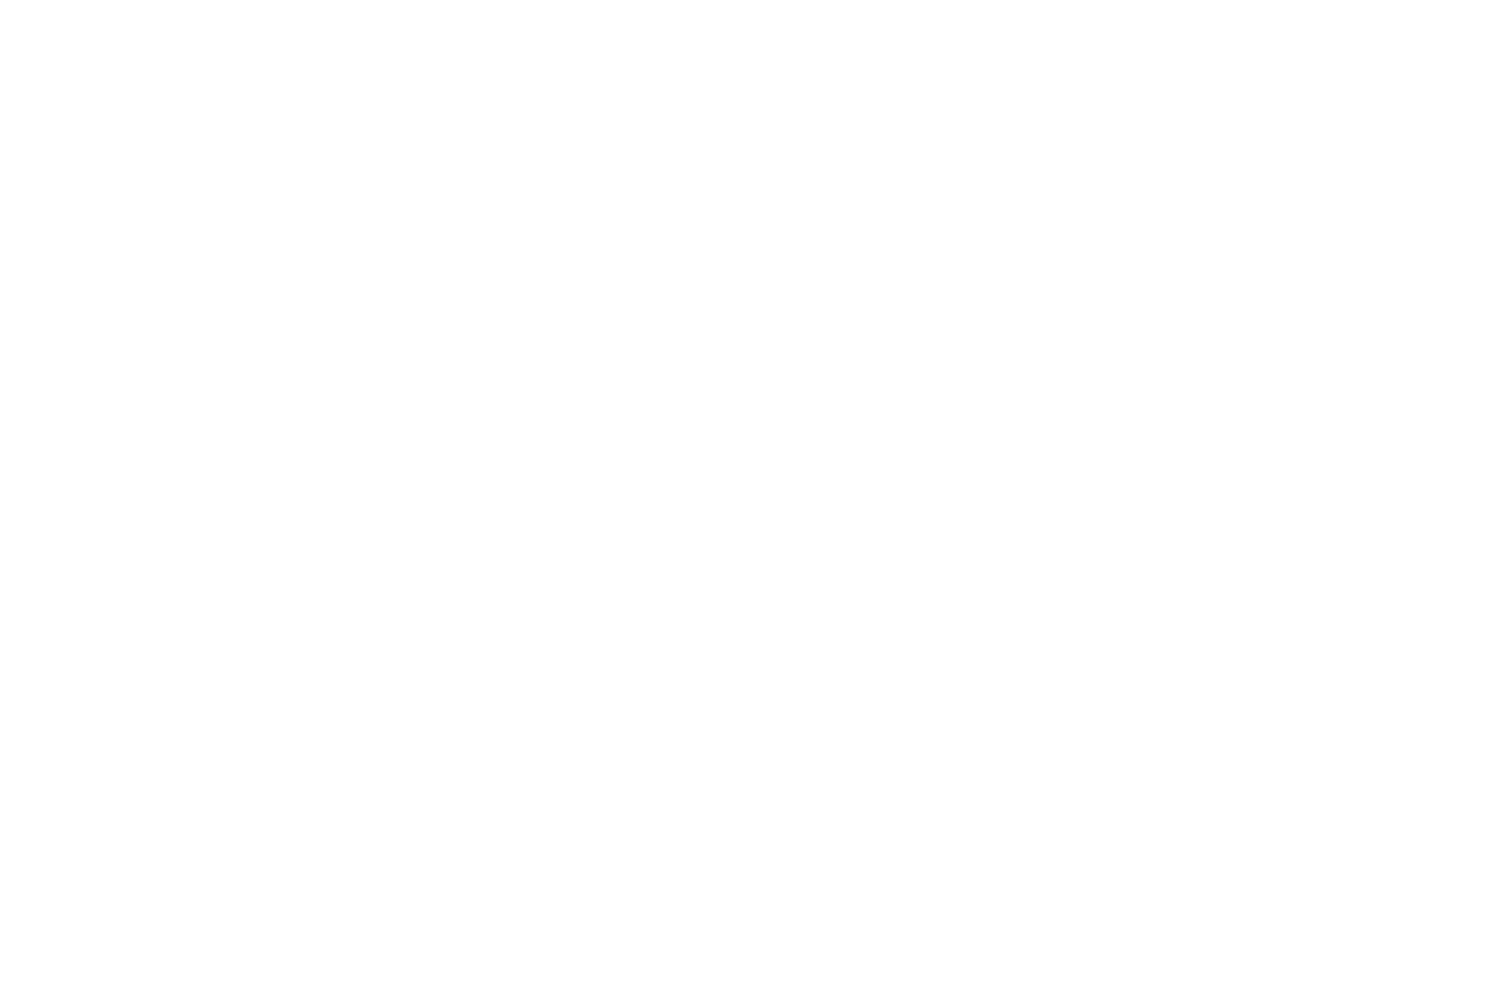 Question-Based Critical Thinking